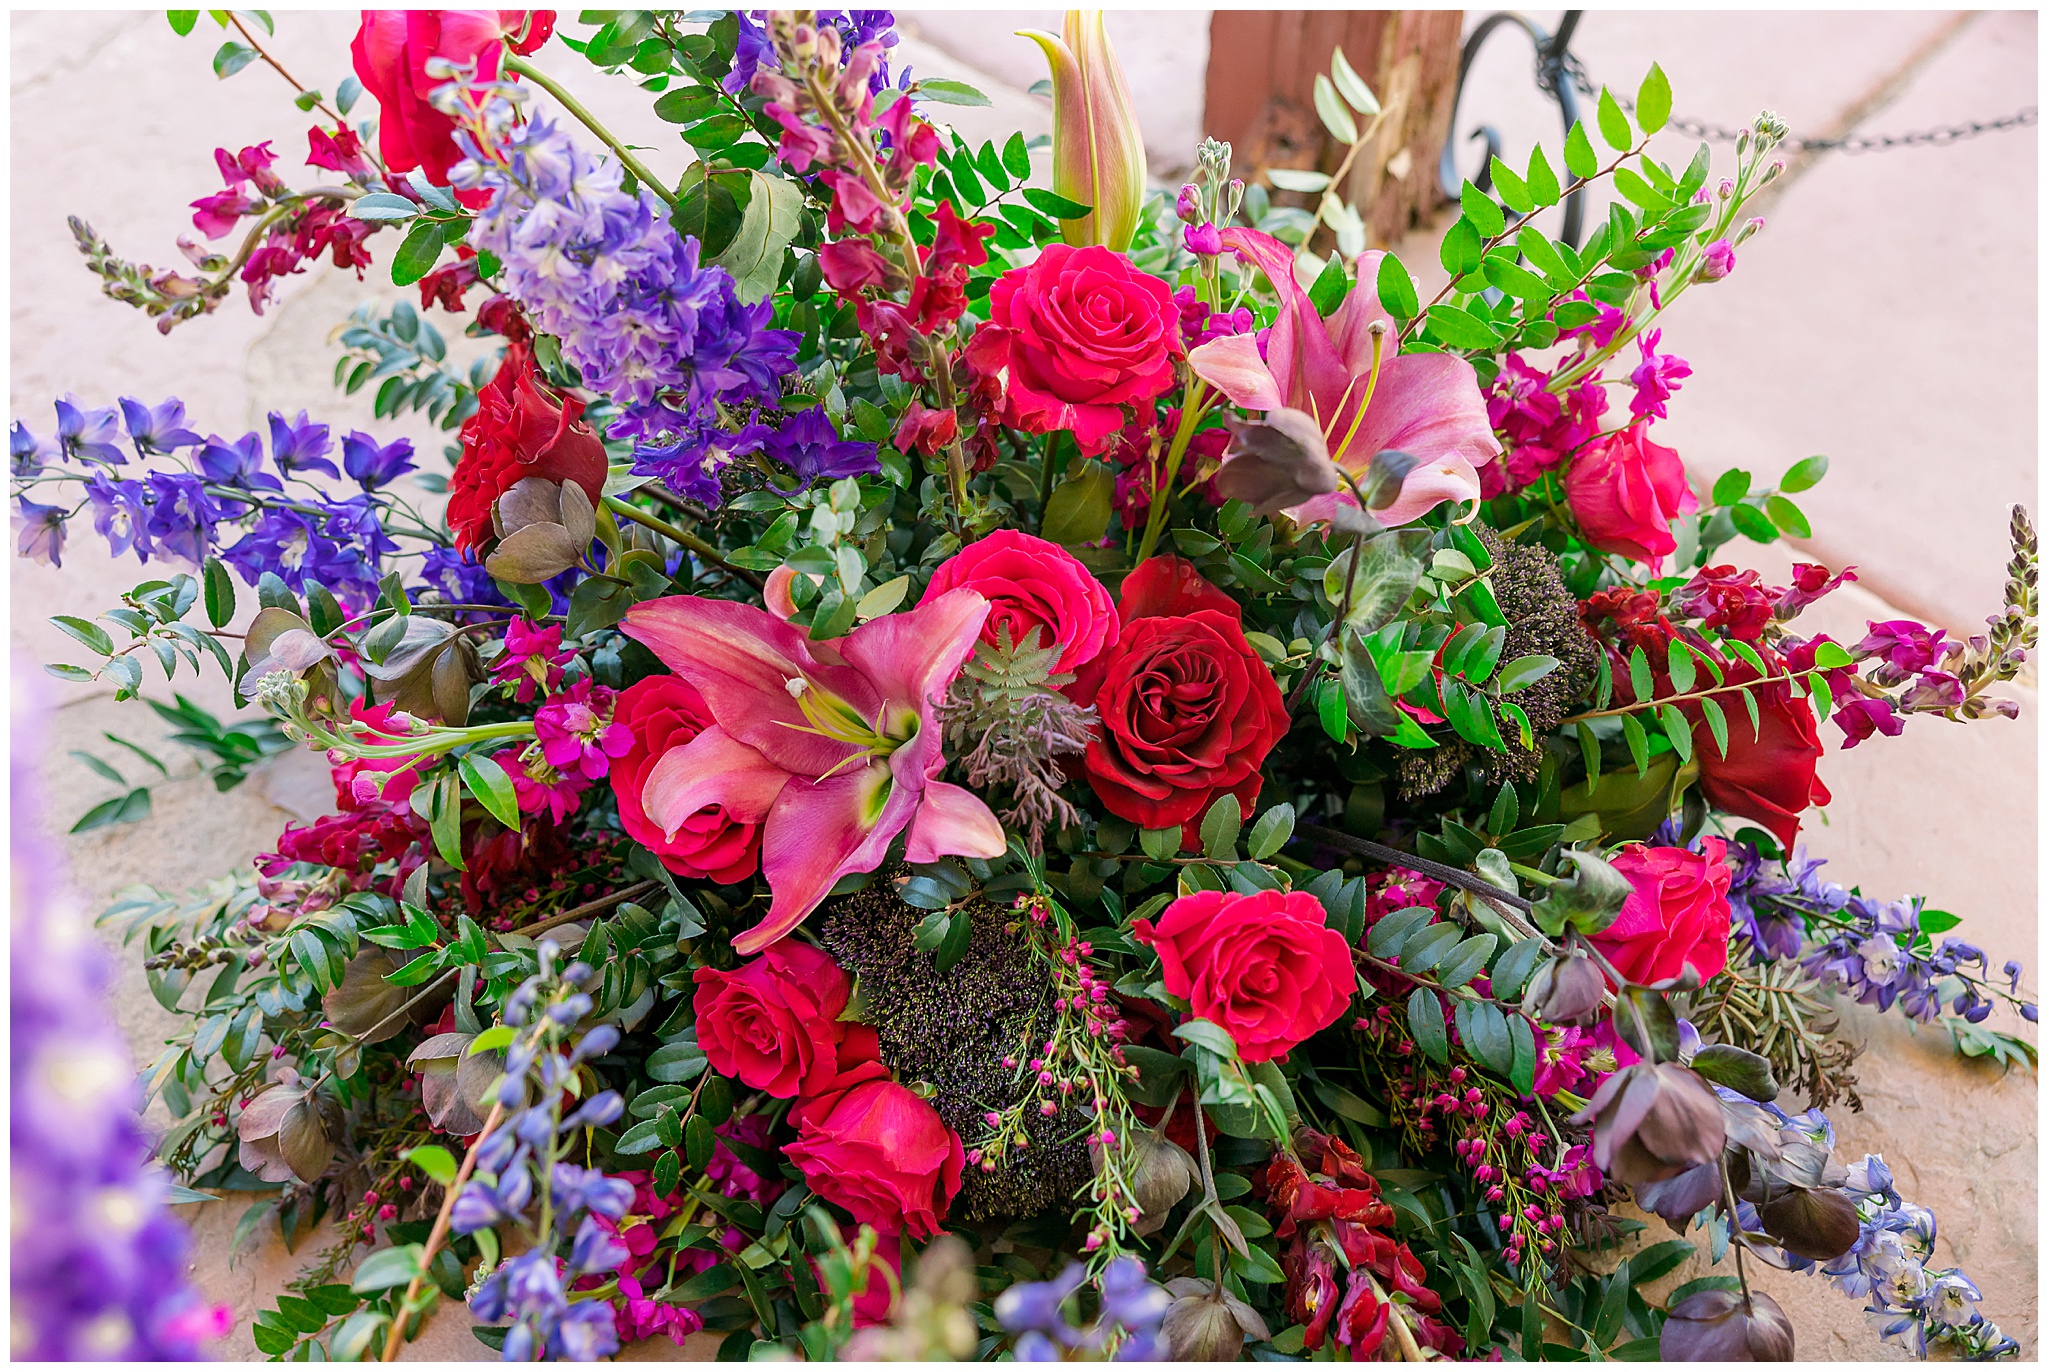 pink, purple, red florals with greenery